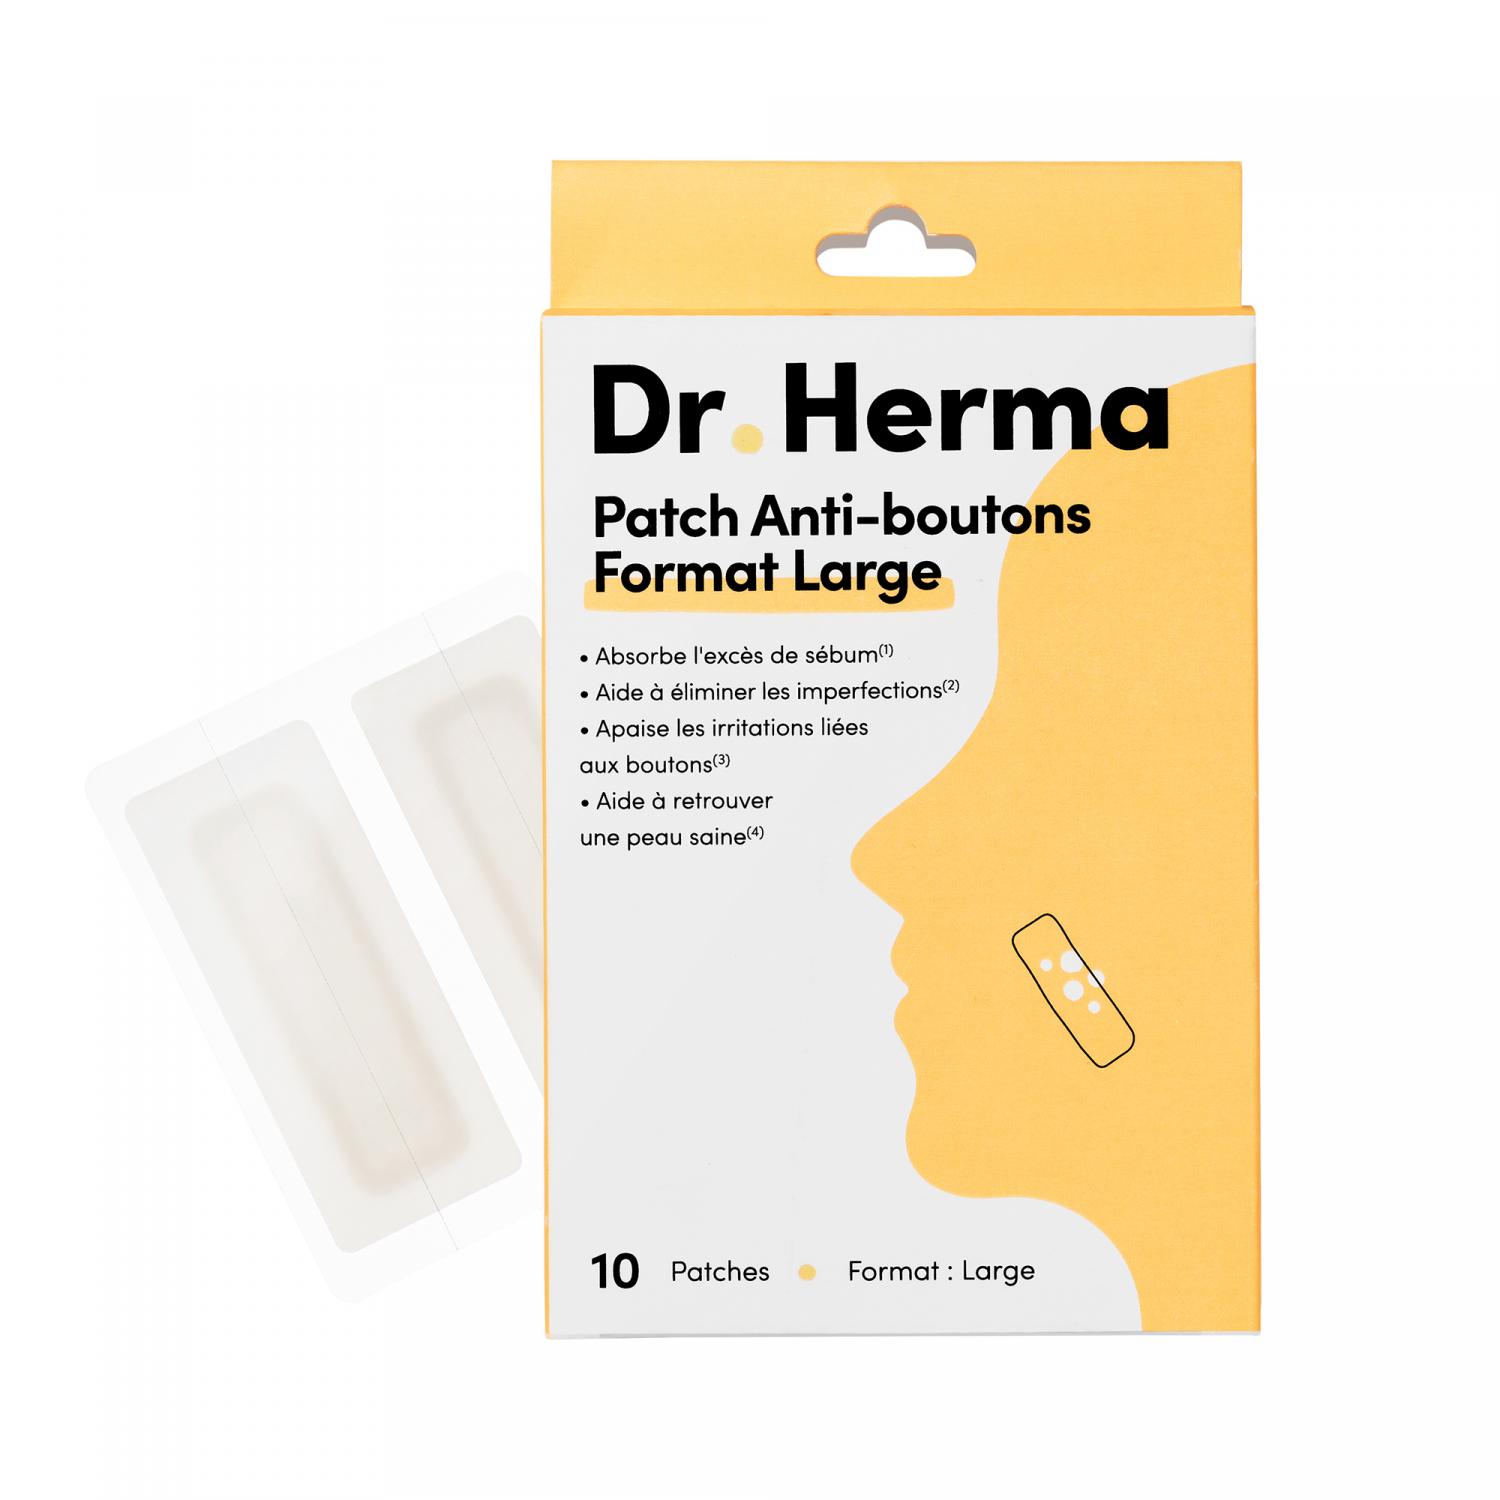 Patch anti-boutons format large Dr Herma - boite de 10 patches